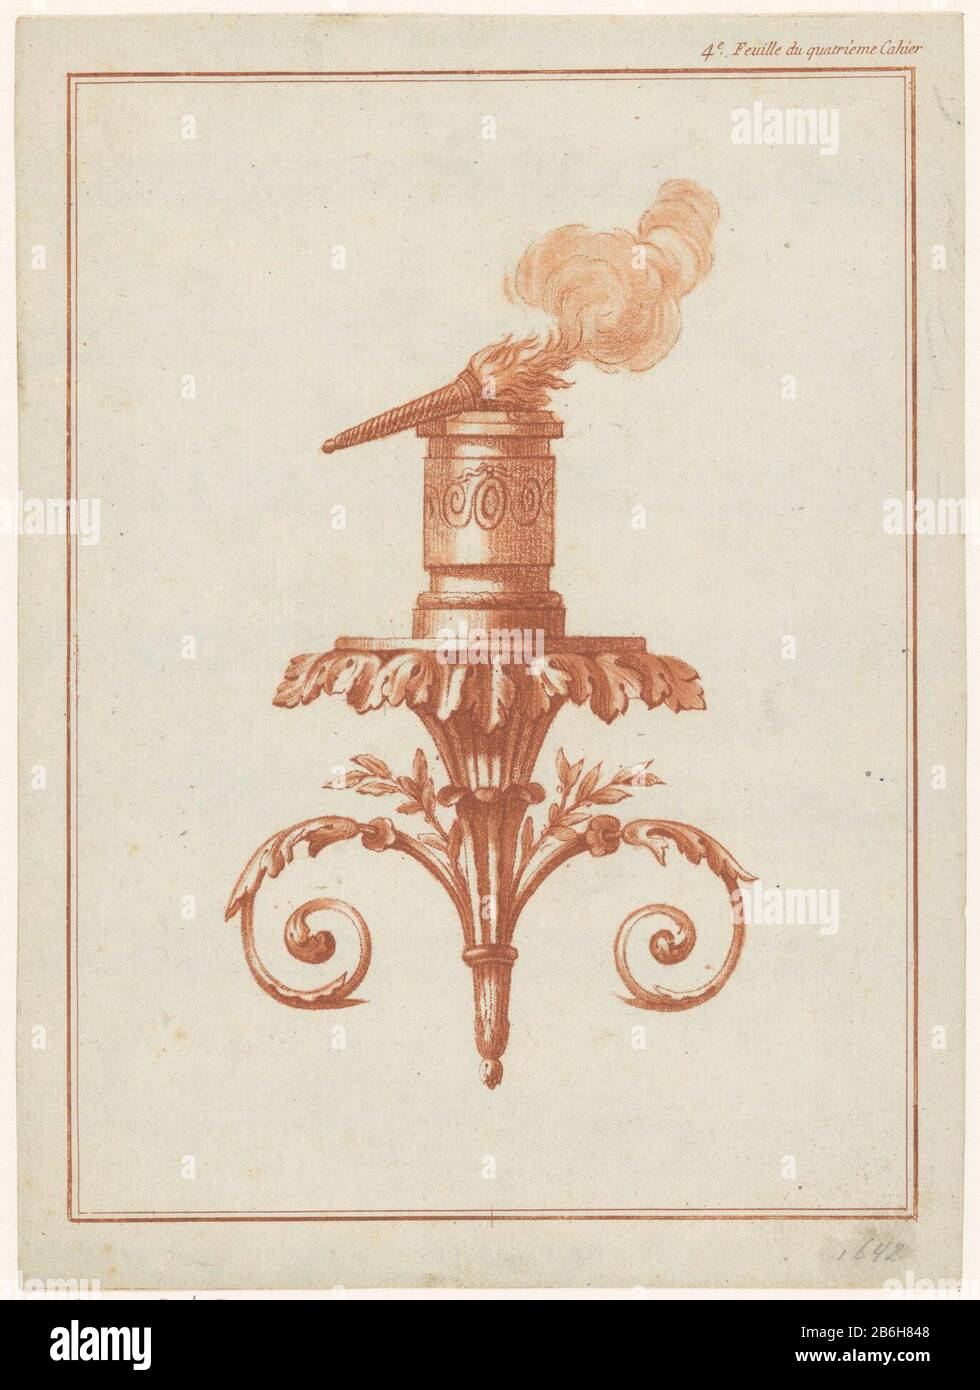 Console Where: a burning torch ligt. Manufacturer : printmaker: anonymous  to drawing: Jean-Baptiste Huet (le vieux) publisher: Louis Marin Bonnet  Place manufacture: Paris Date: 1770 - 1780 Physical features: crayonmanier  Material: paper